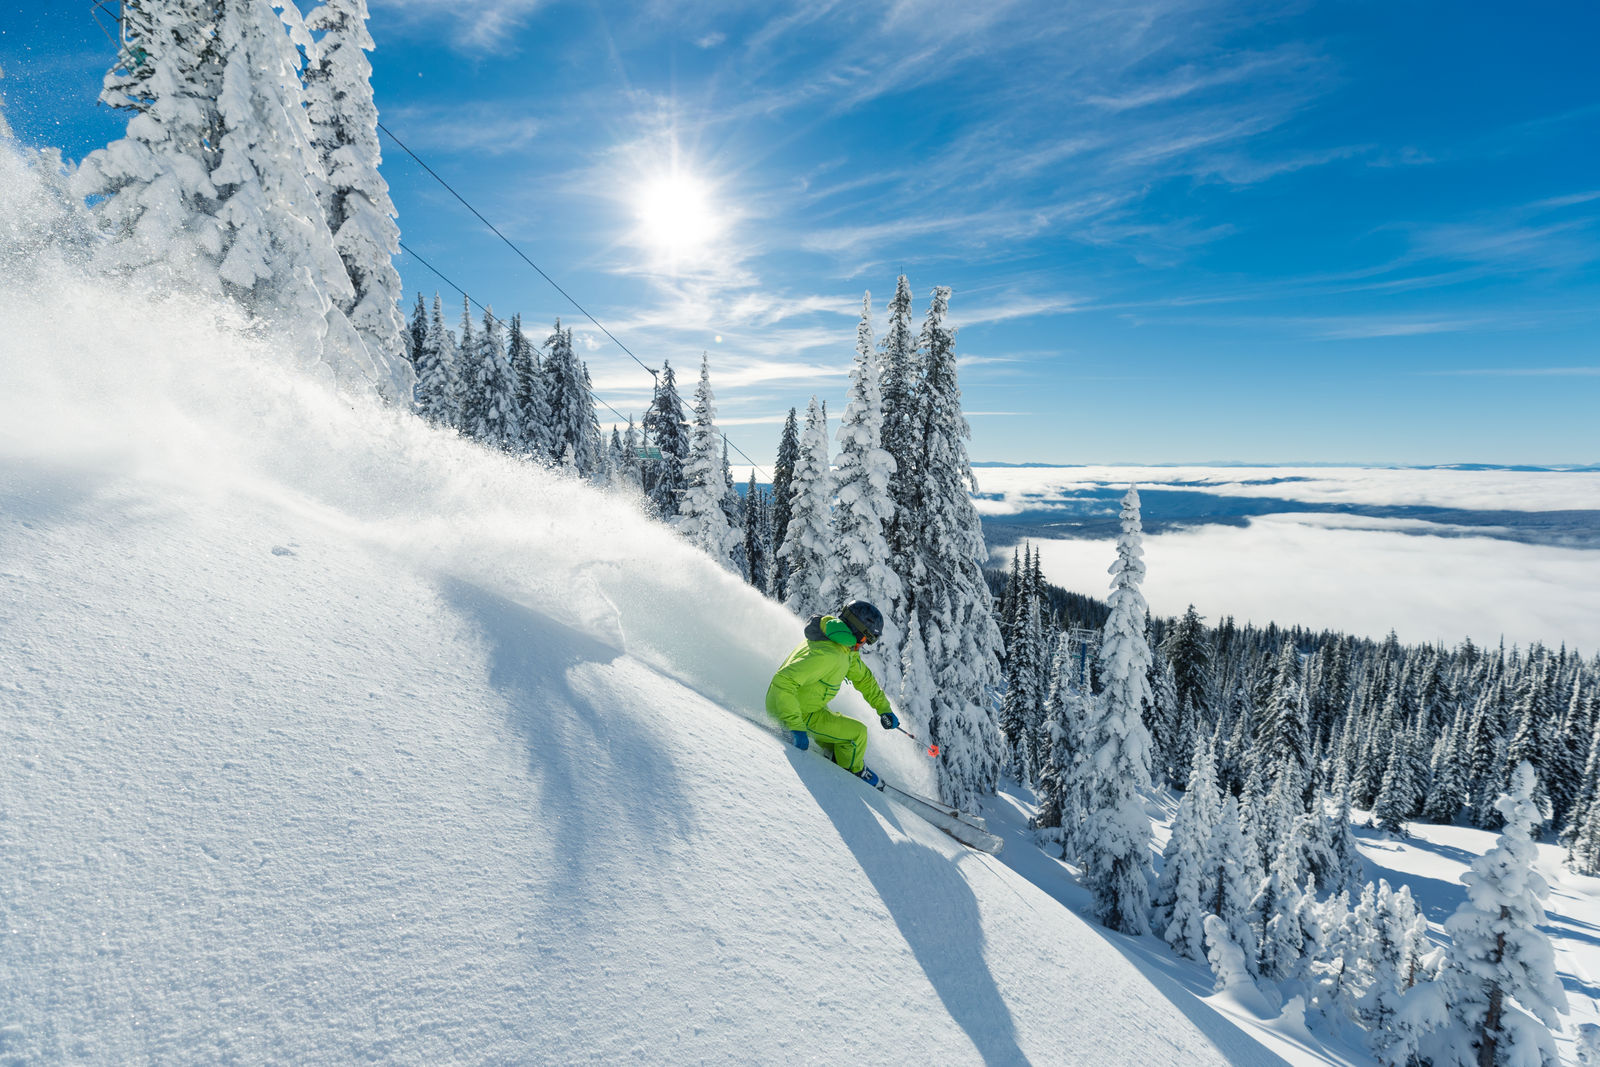 When you book our Stay and Ski Package, you can enjoy a night at the Comfort Suites hotel in Kelowna and a day at Big White. Photo Credit: Geoff Holman